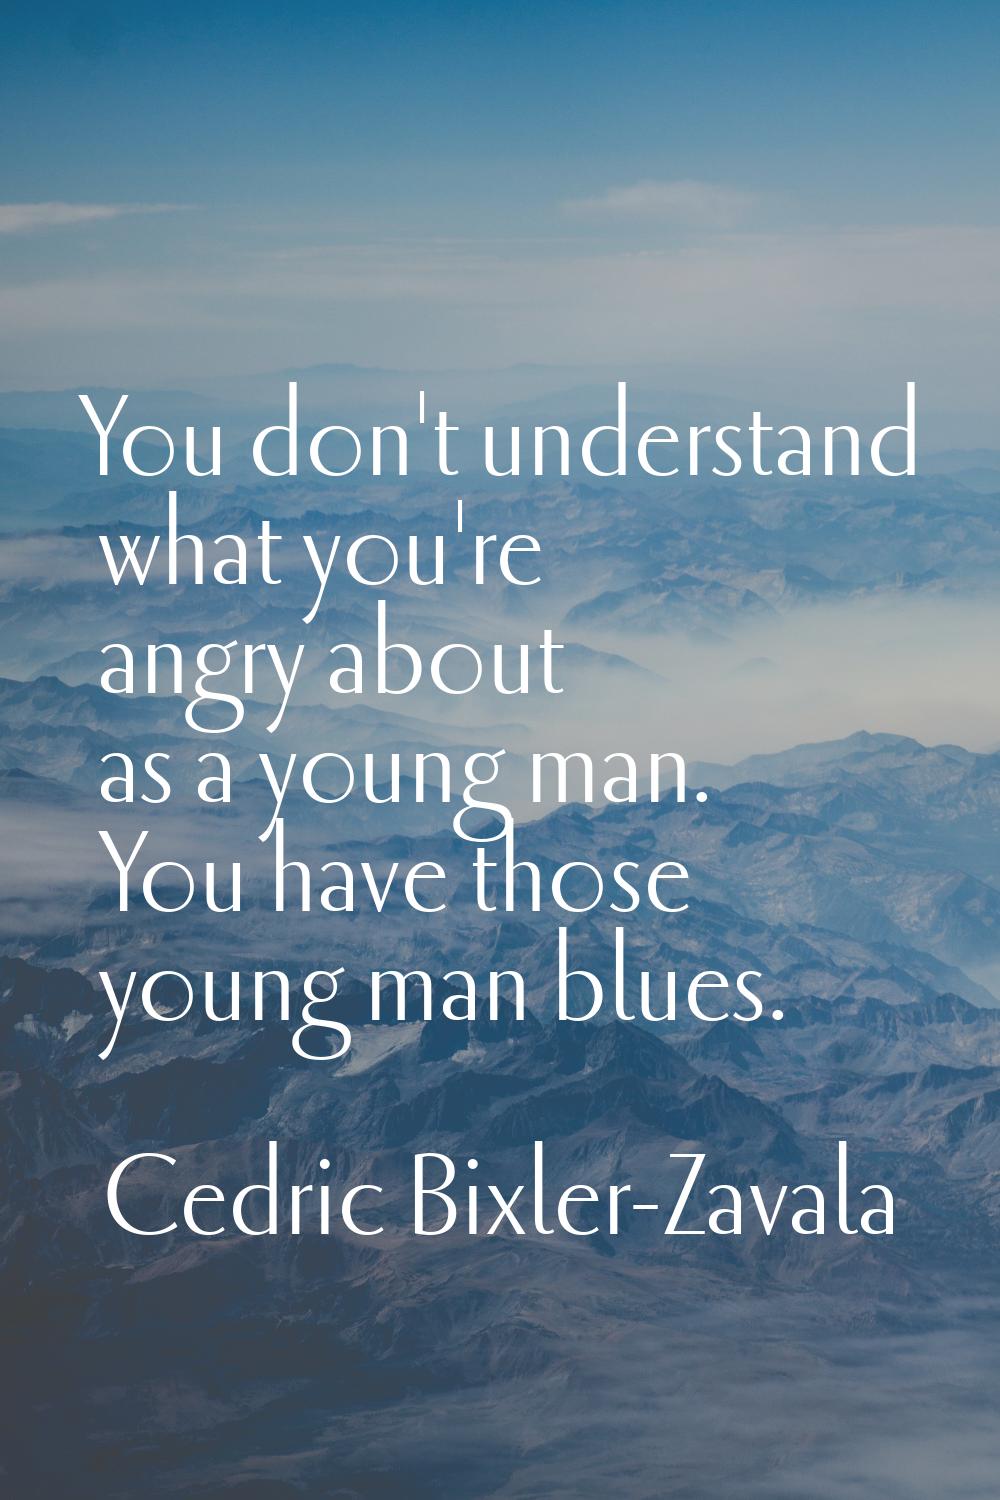 You don't understand what you're angry about as a young man. You have those young man blues.